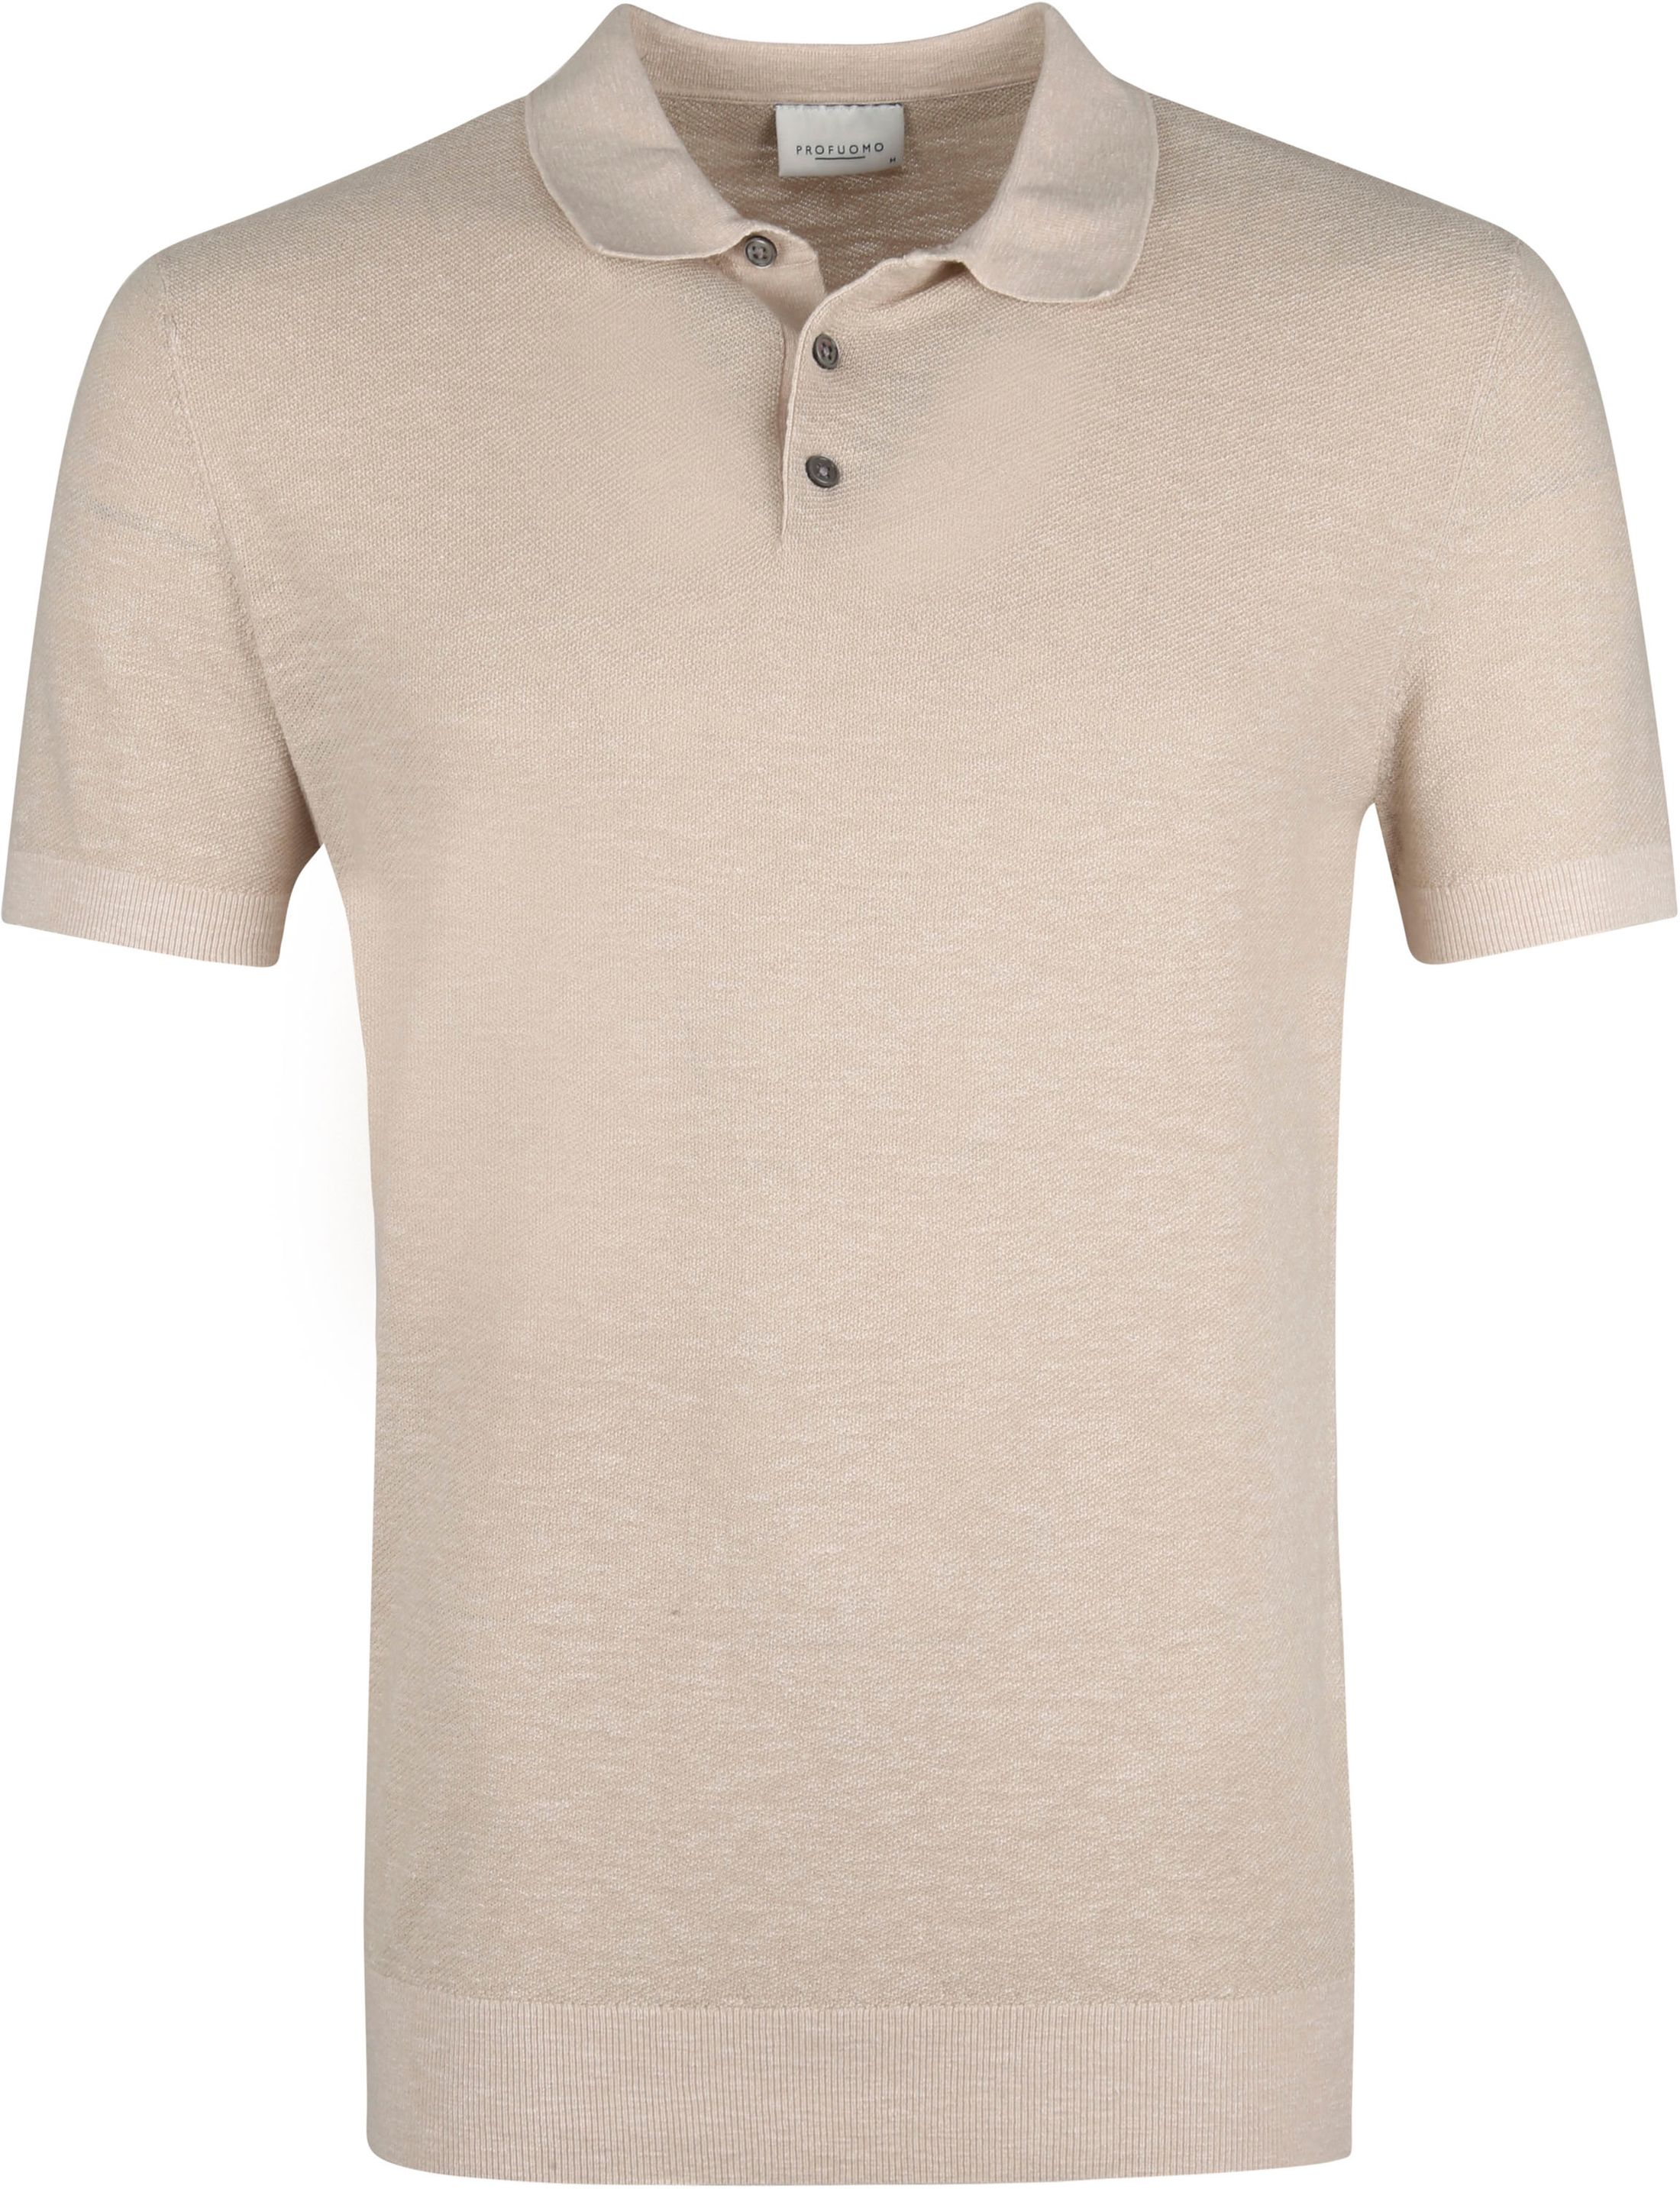 Profuomo Poloshirt Short Sleeves Beige size L